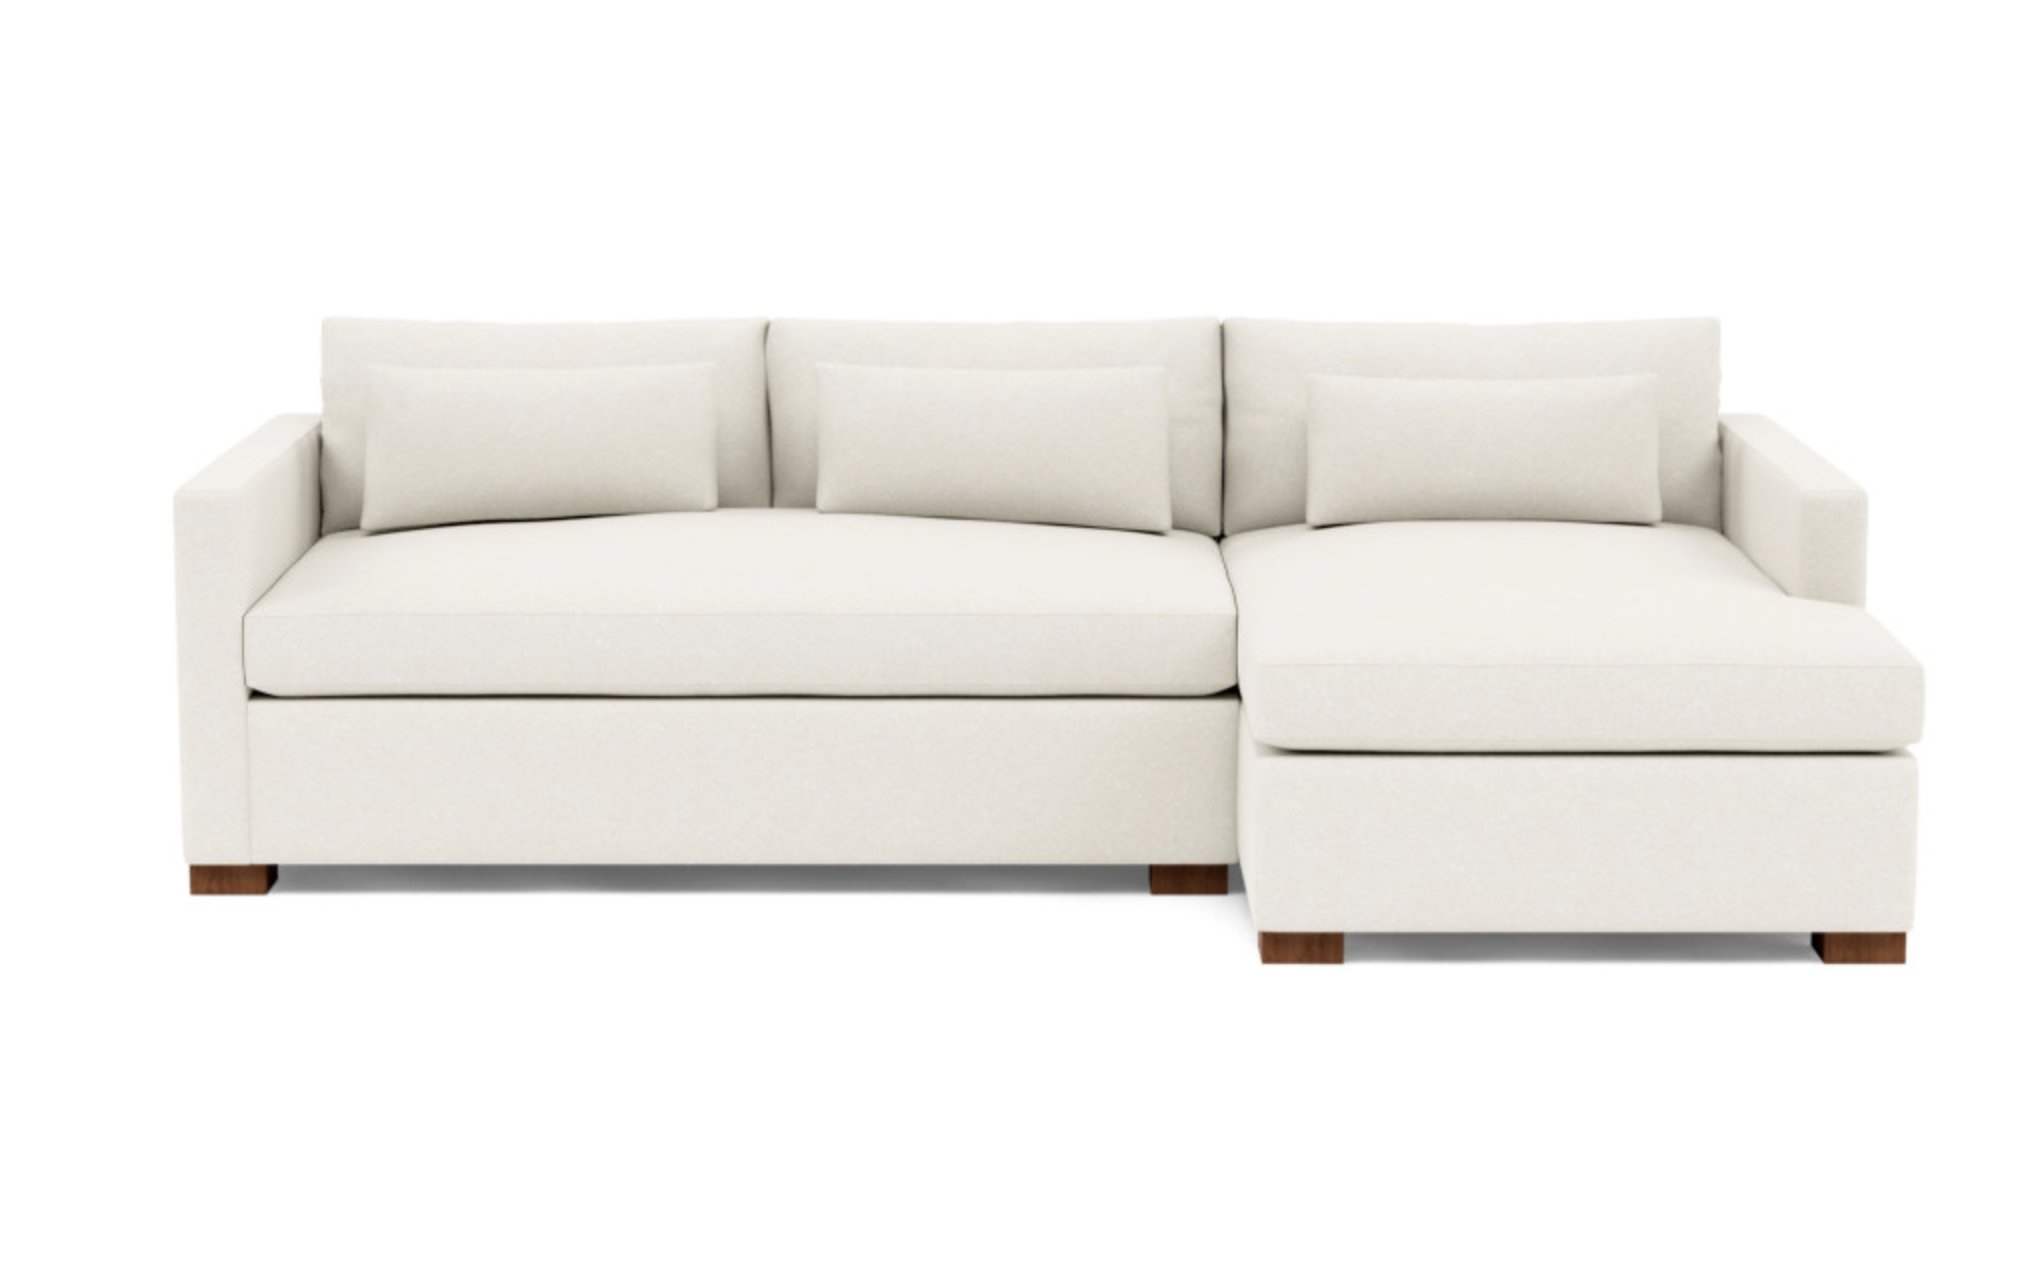 Charly Right Sectional with White Cirrus Fabric and Oiled Walnut legs - Image 0